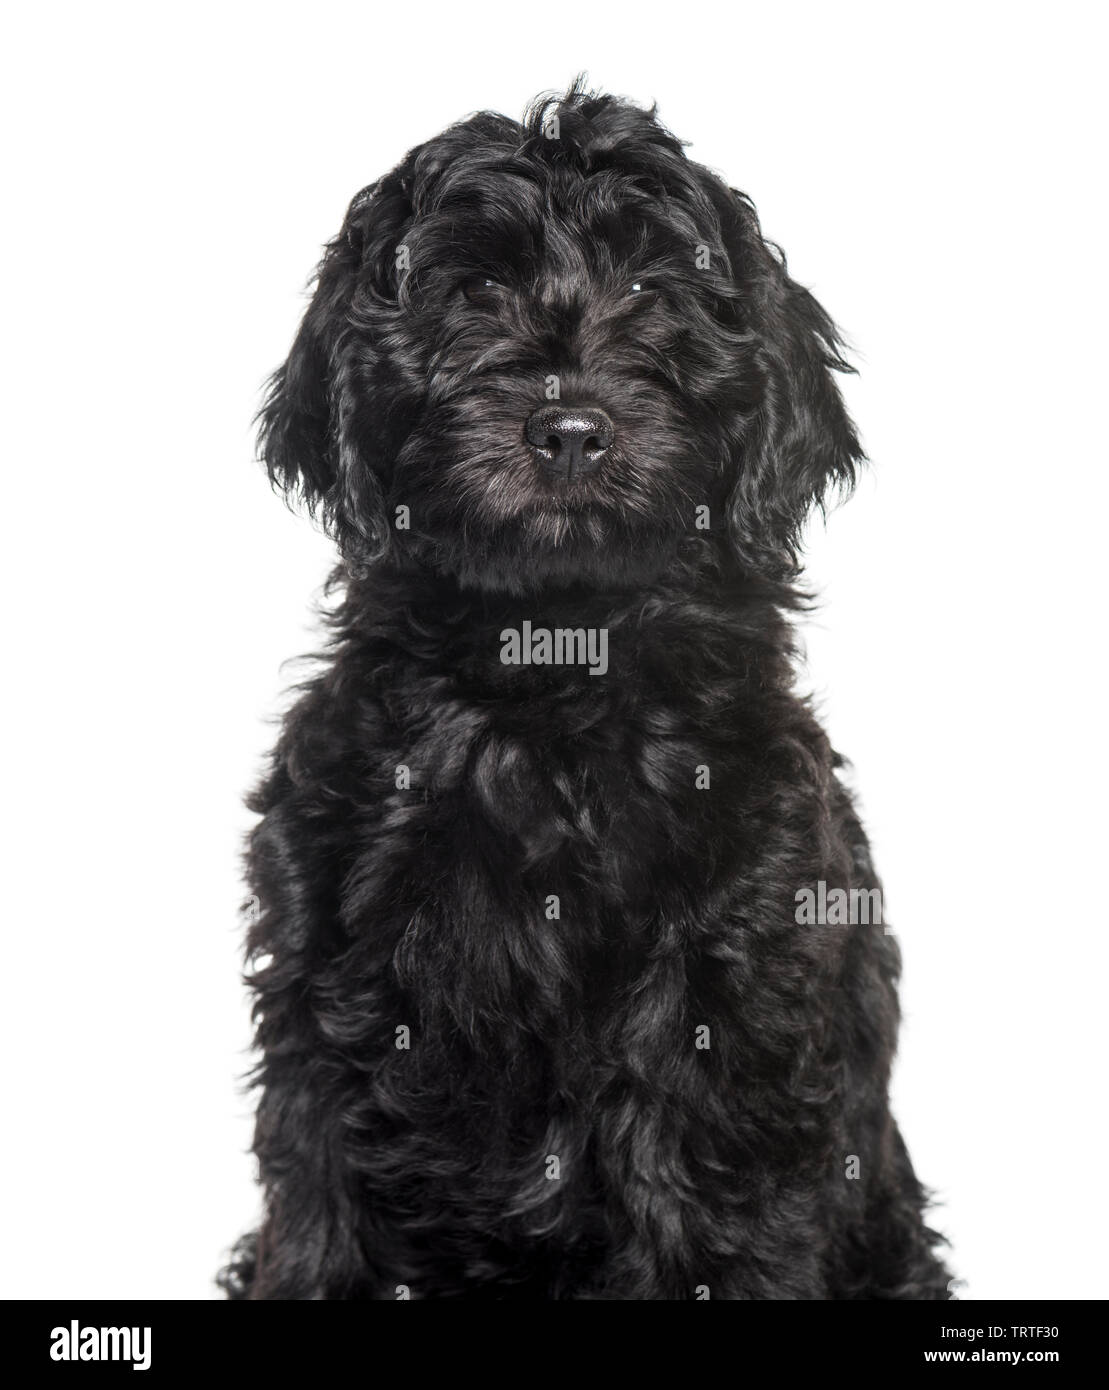 Race mixte labradoodle looking at camera against white background Banque D'Images